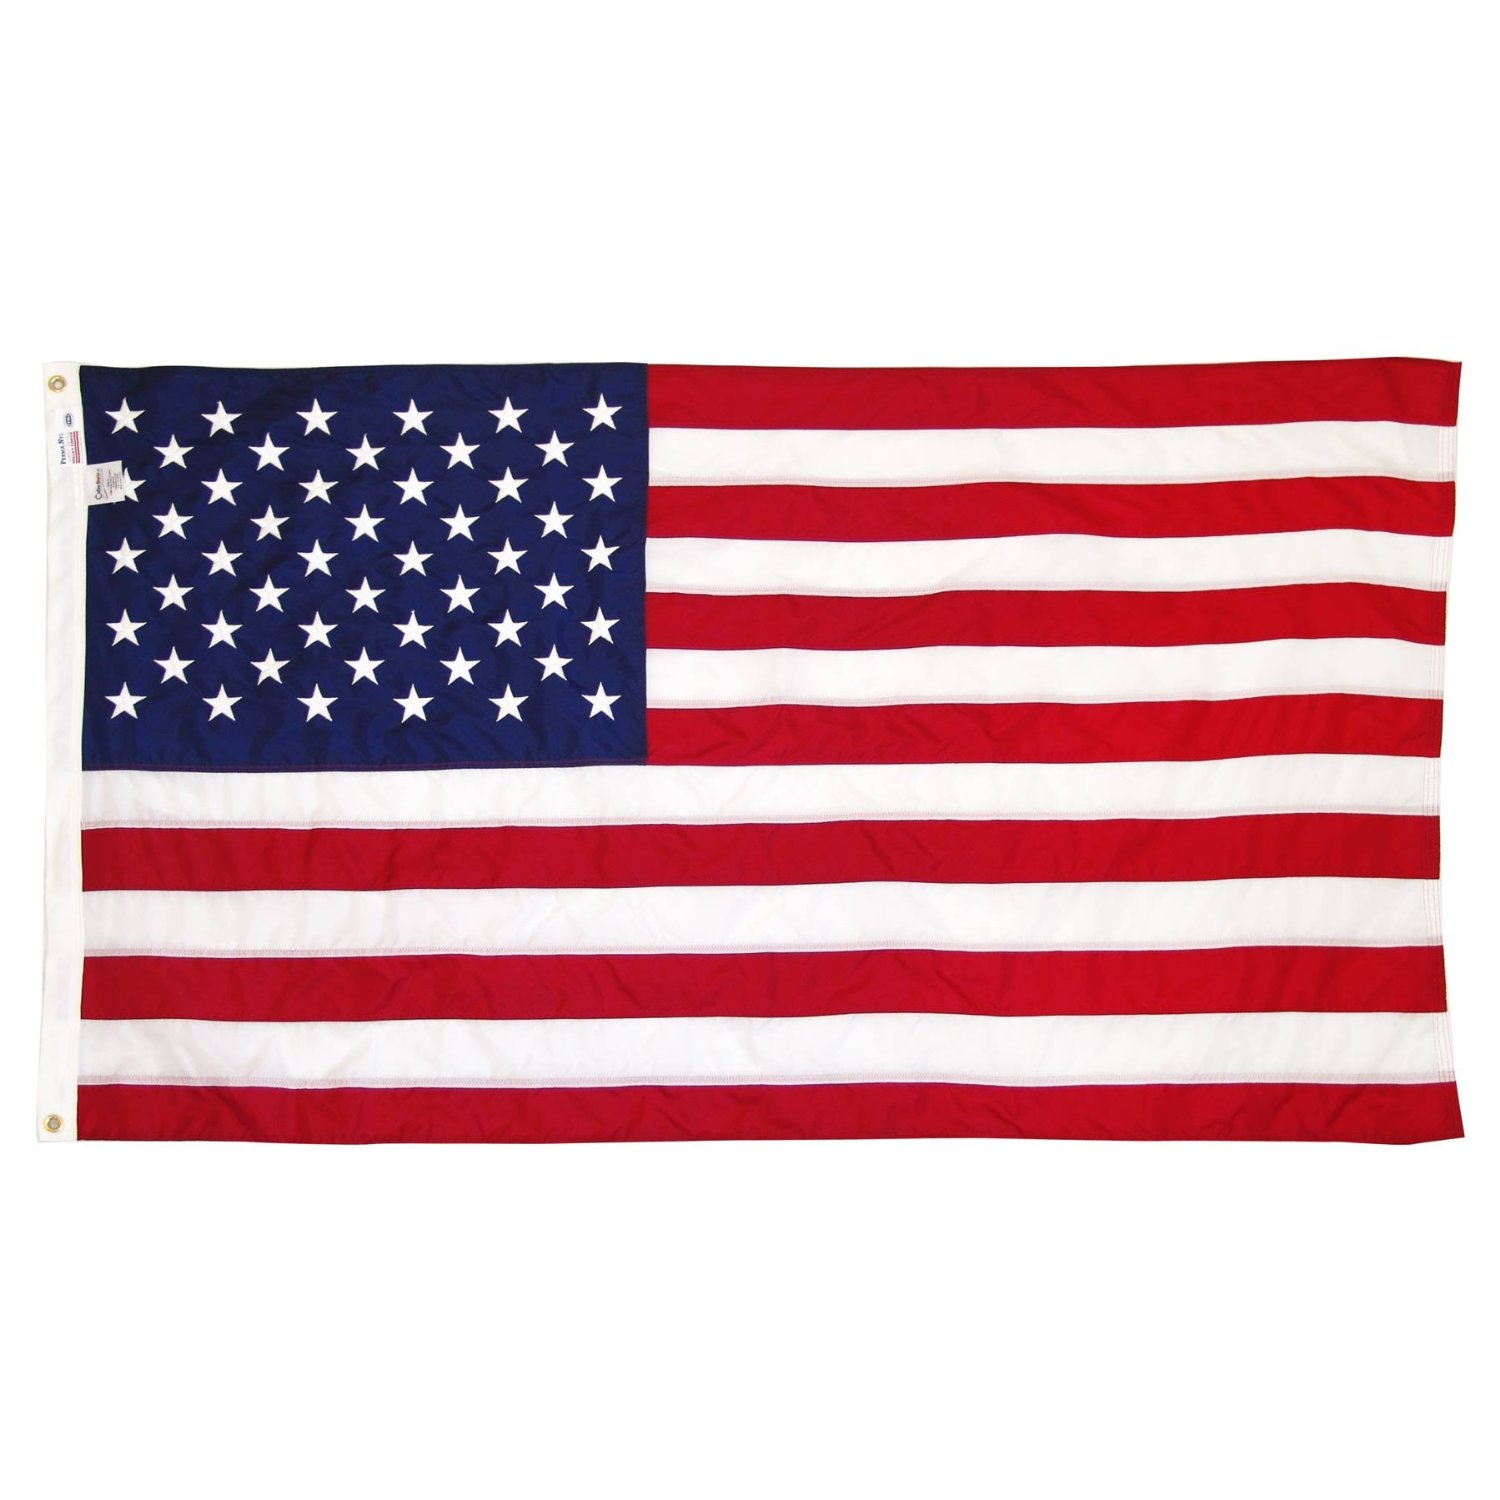 Sewn Stripes 2-PACKAmerican Flag US USA3x5ftEmbroidered Stars 